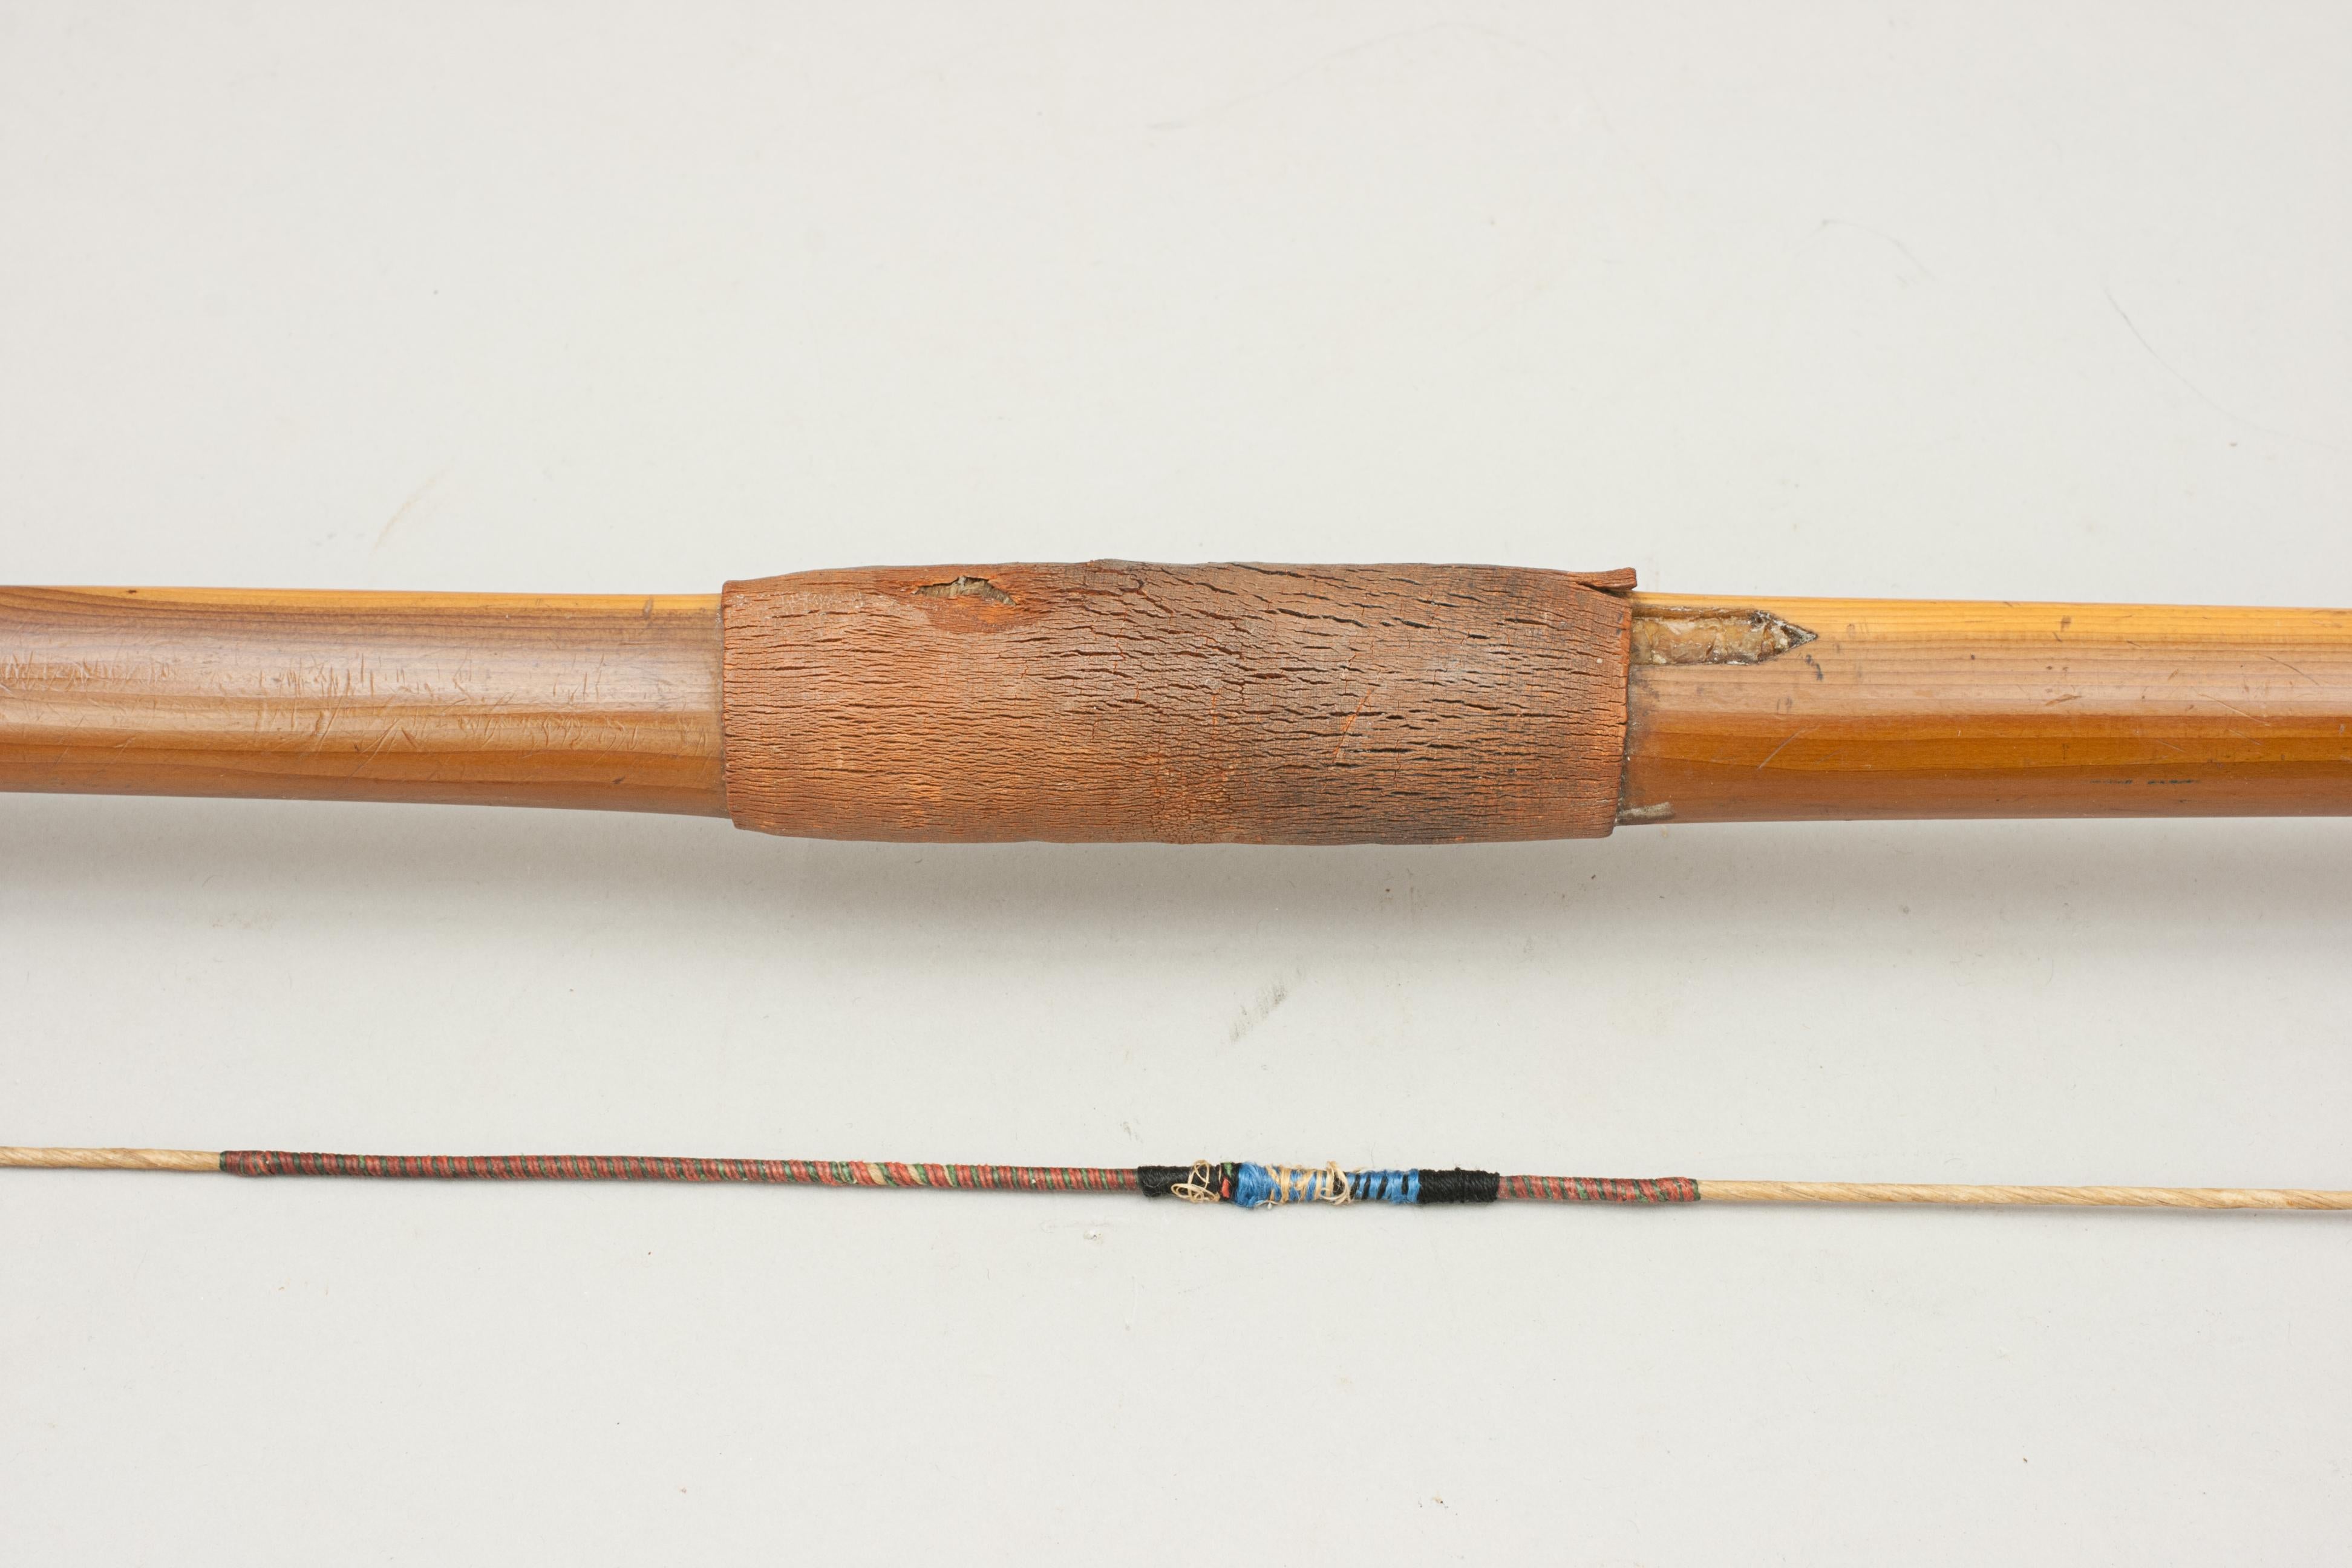 Antique Archery Longbow in Yew Wood by Thomas Aldred 1